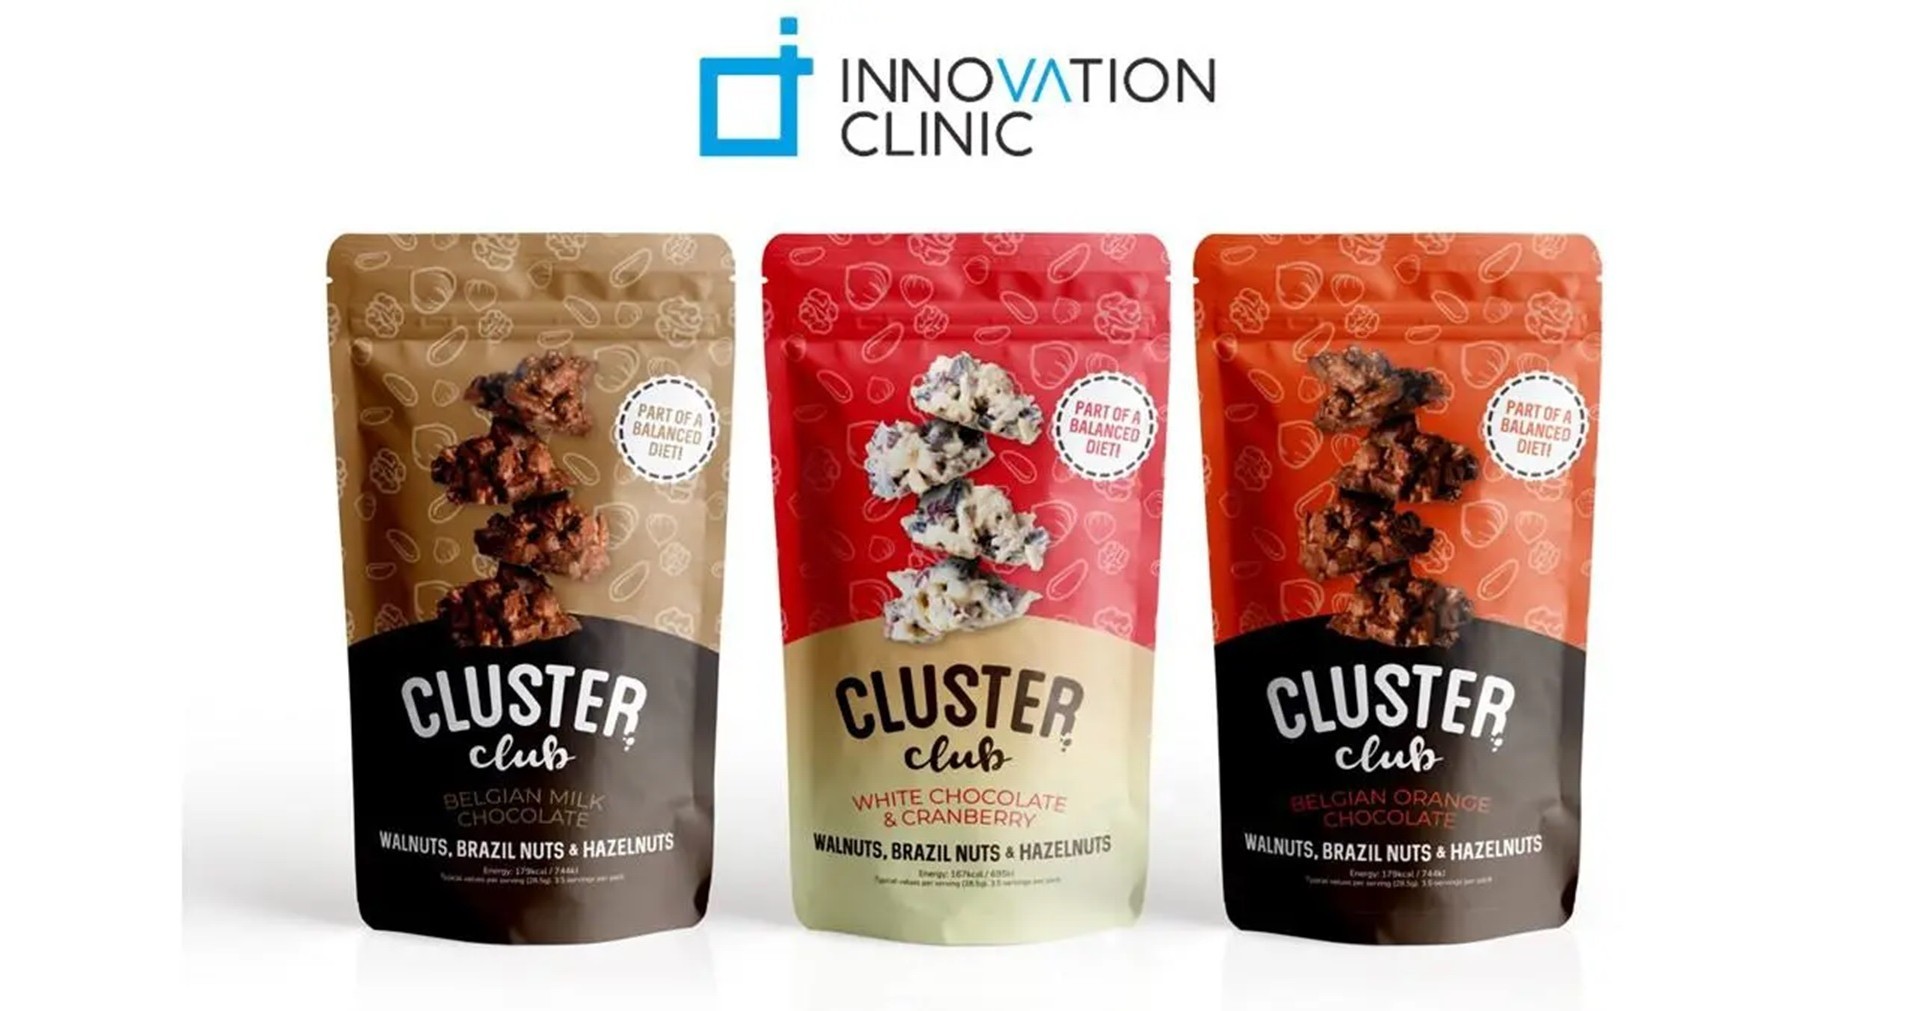 Innovation Clinic Cluster Club